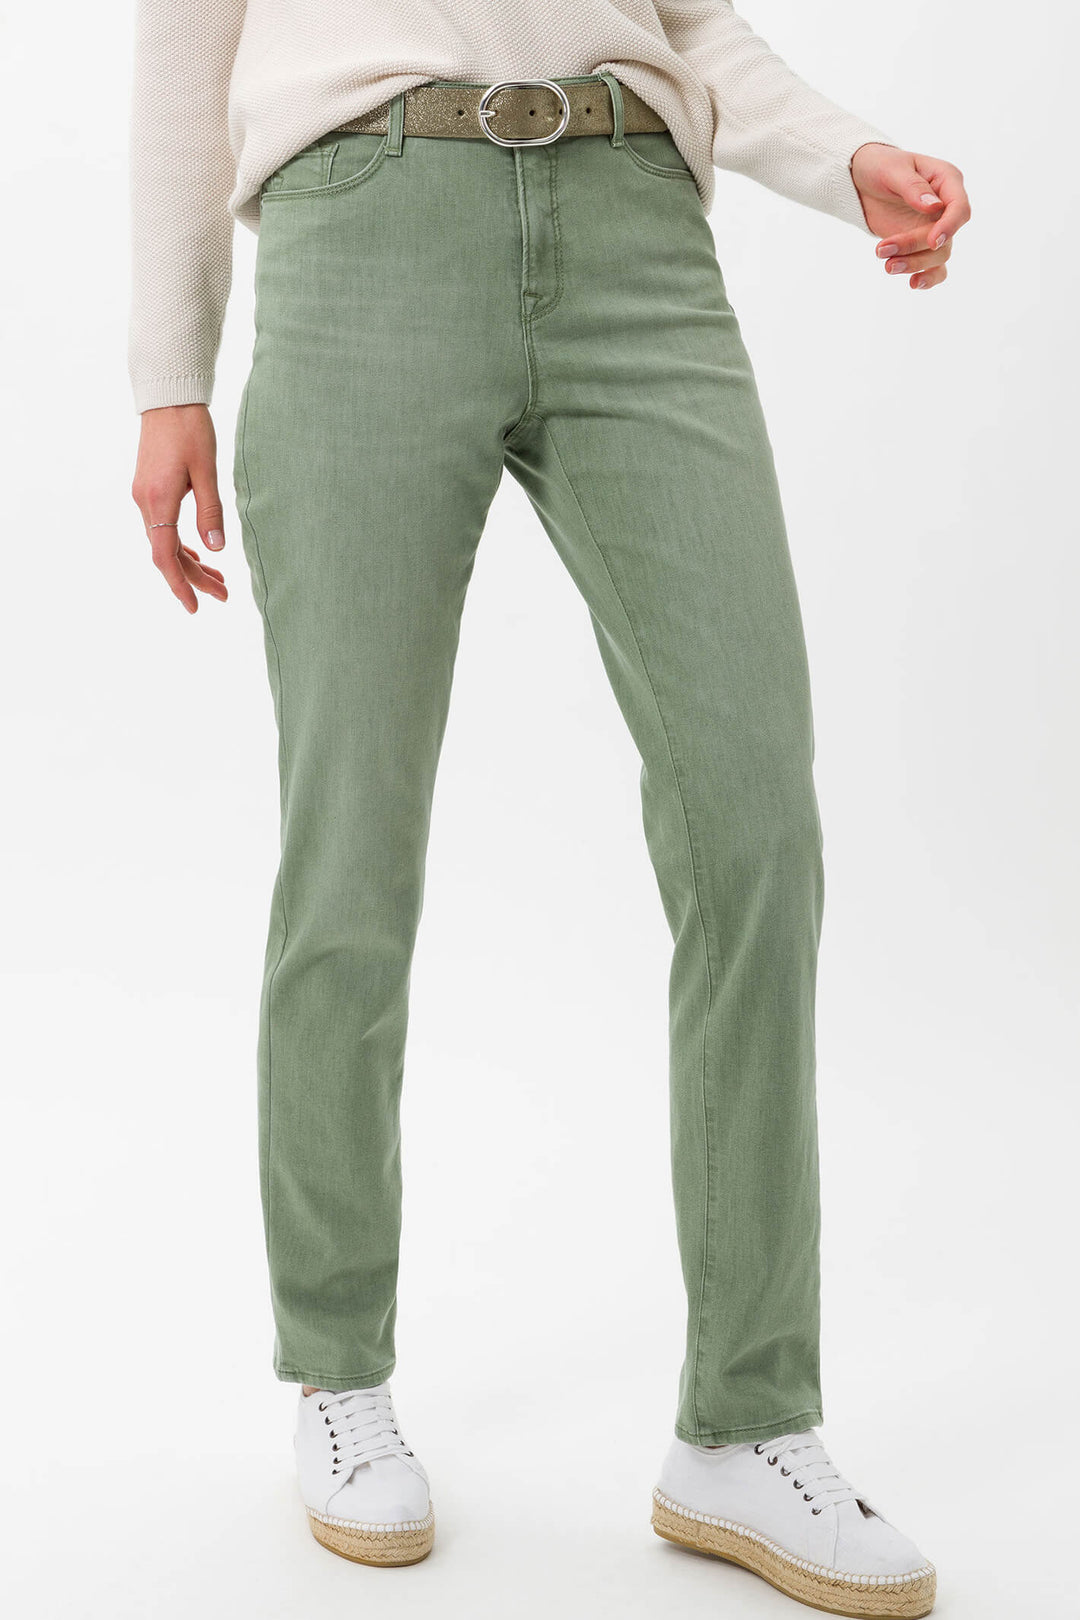 Brax Mary 74-4007-34 Blue Planet Green Jeans - Shirley Allum Boutique